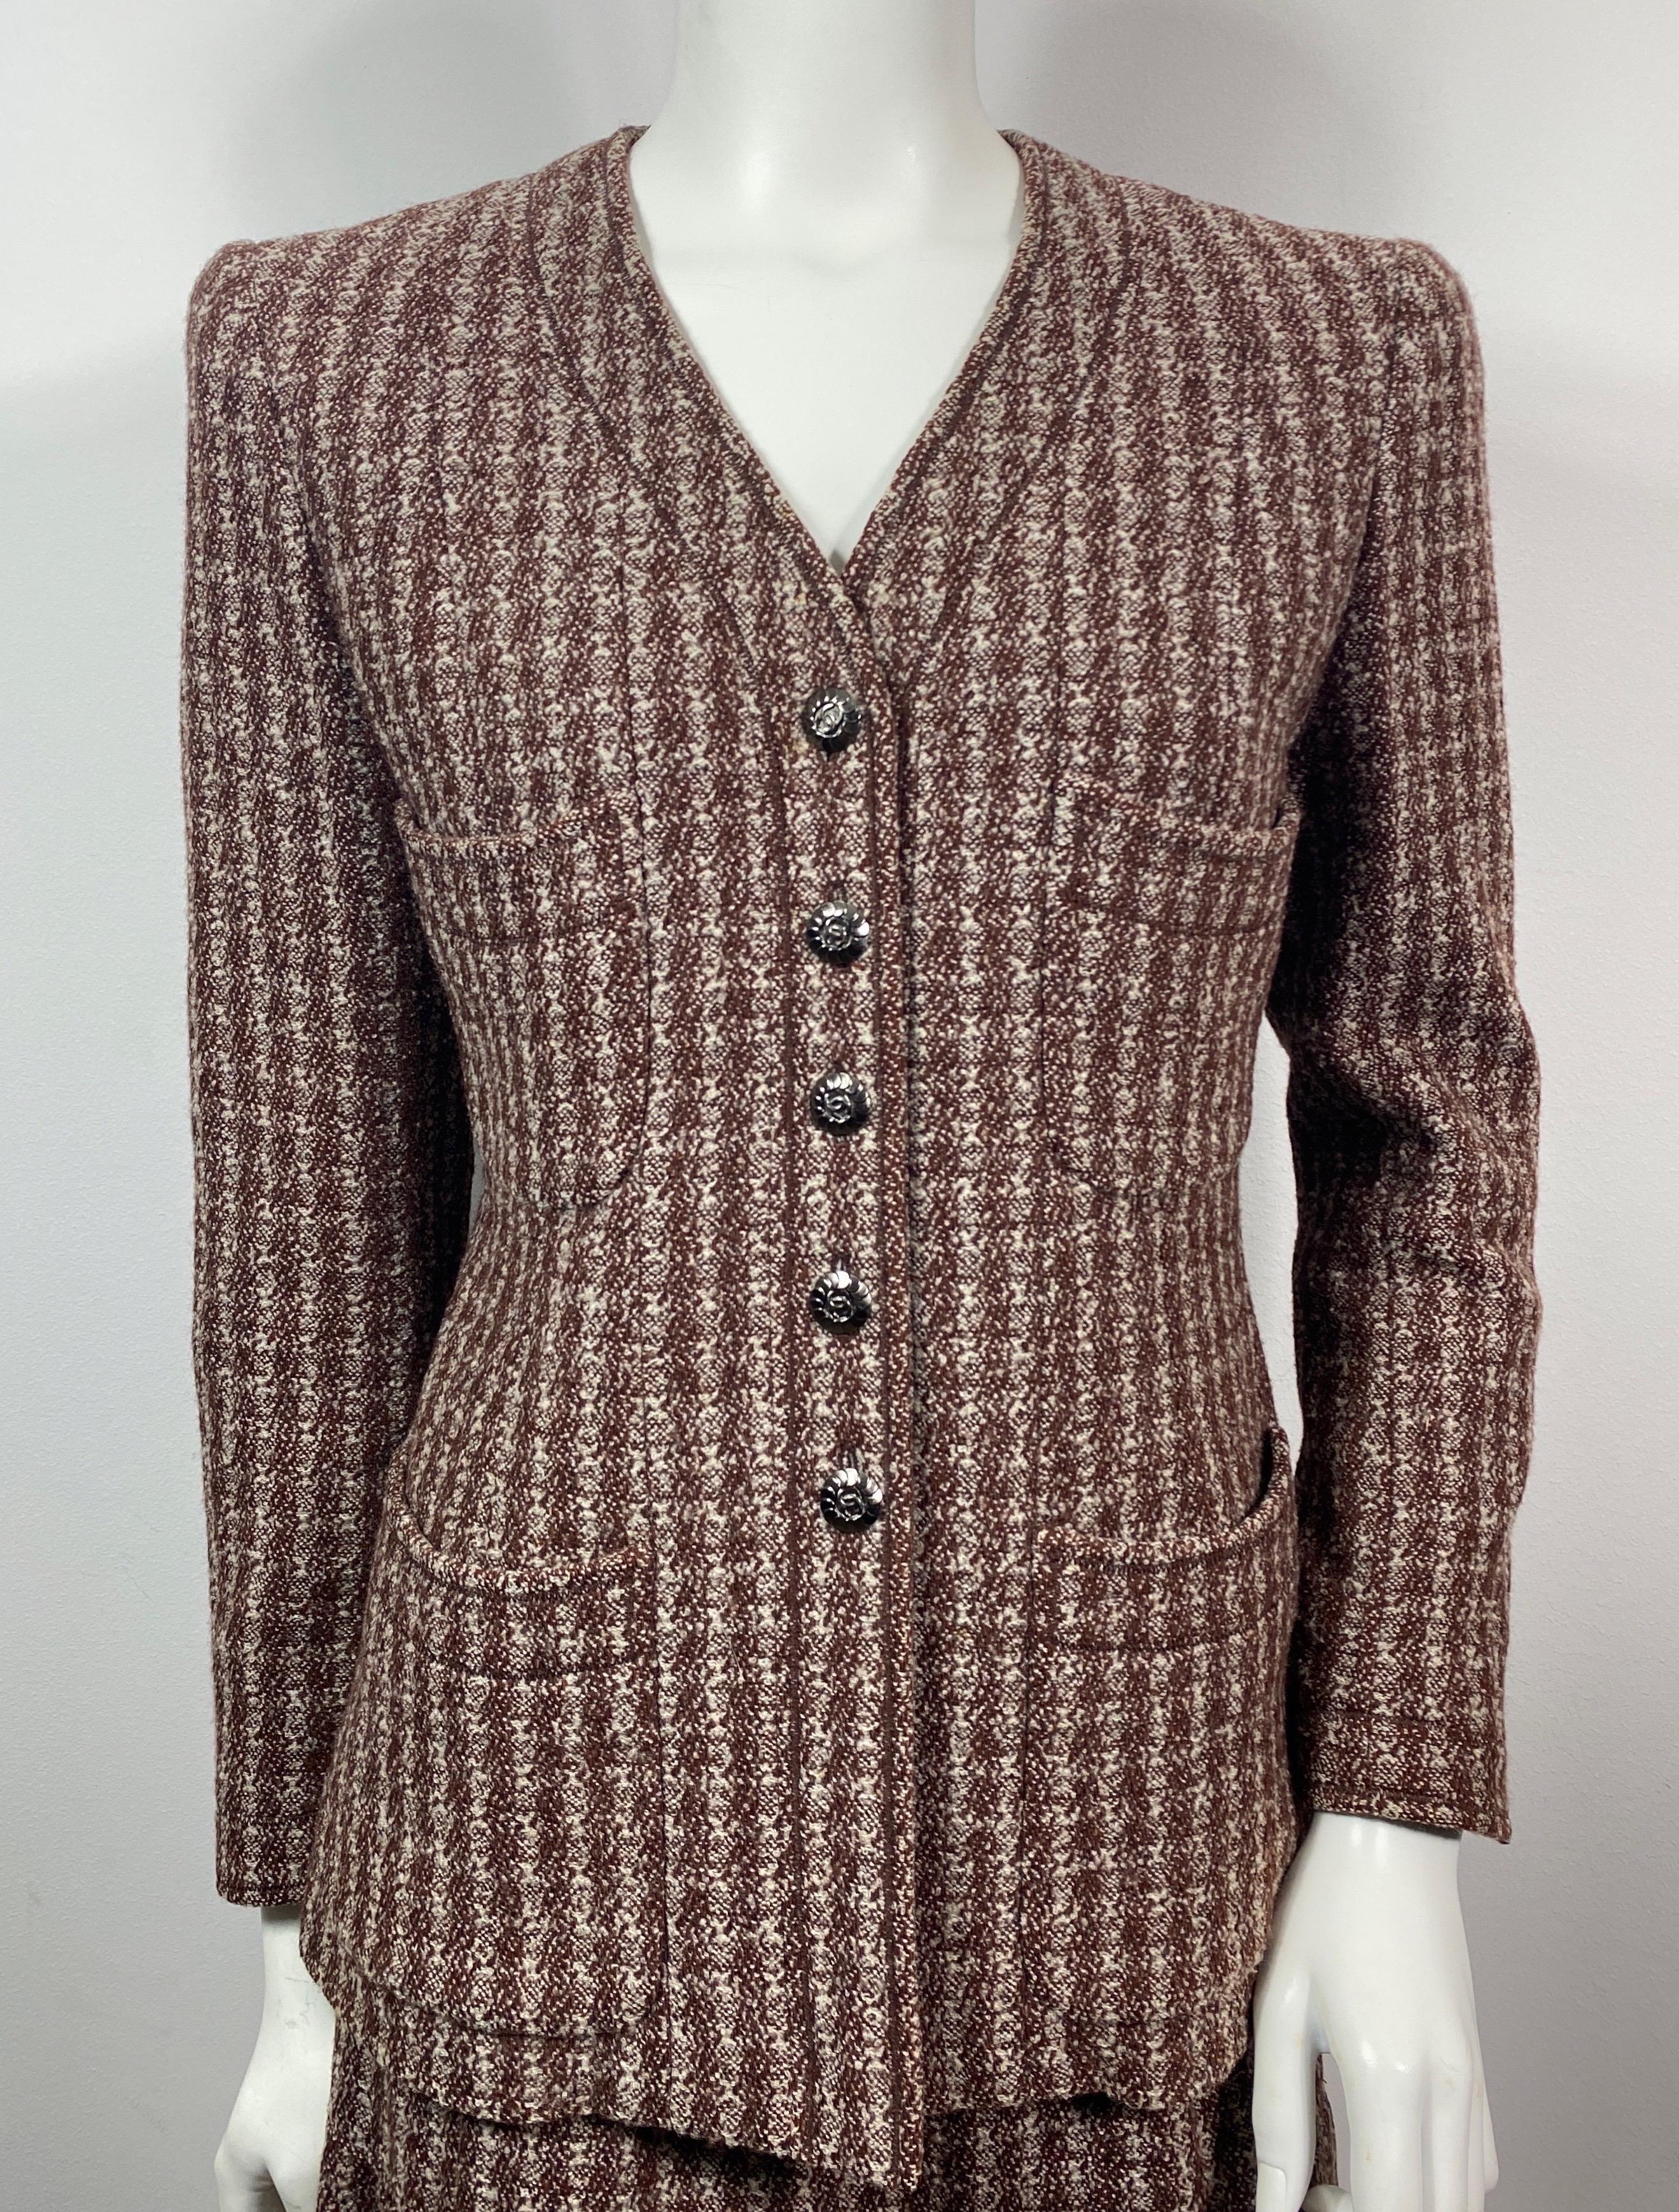 Chanel 1990’s Brown and Crème Wool Nailshead Tweed Skirt Suit-size 36 In Good Condition For Sale In West Palm Beach, FL